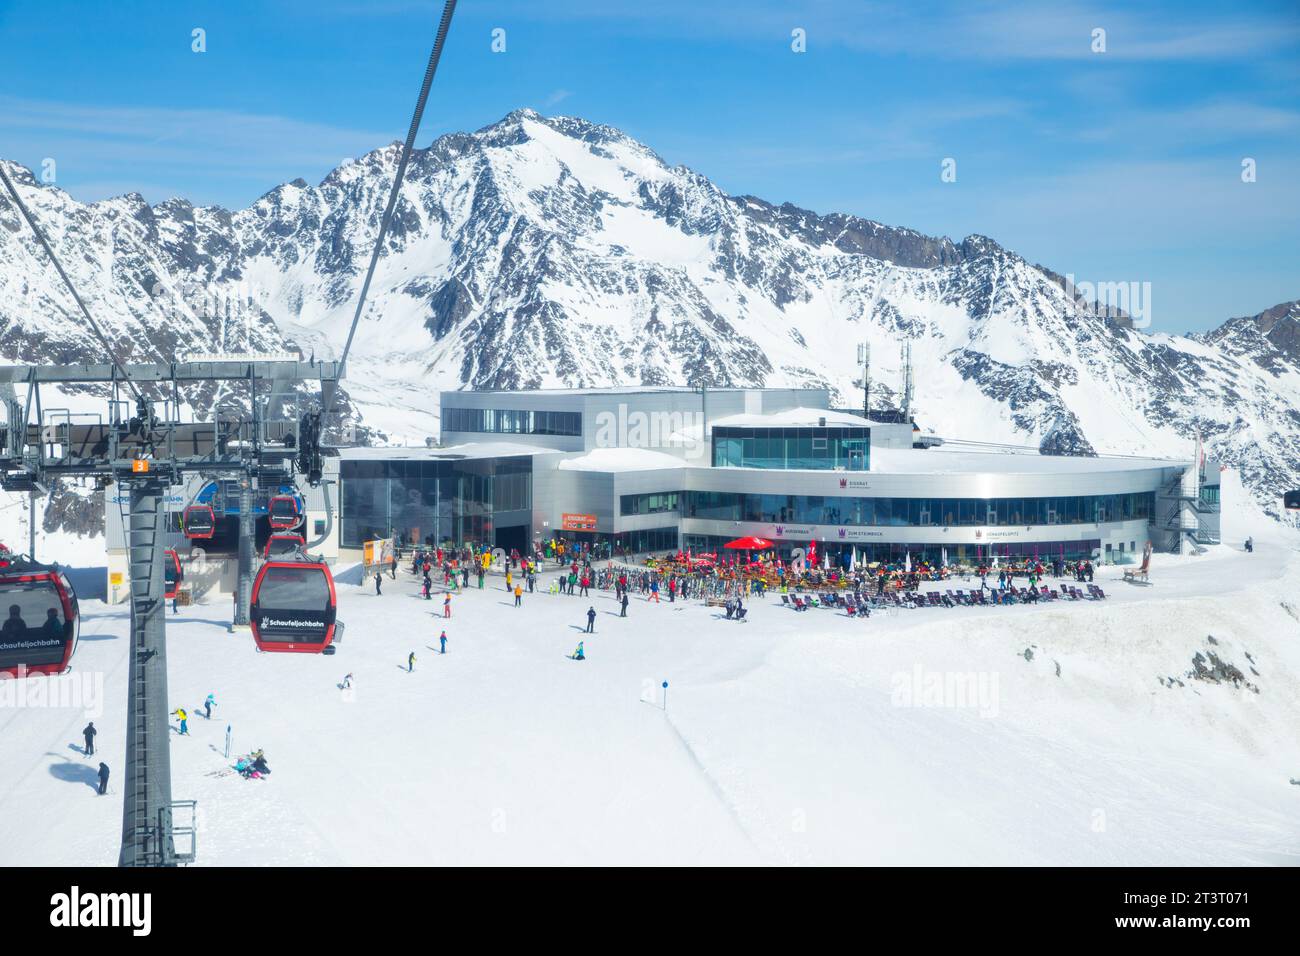 Aerial view of  Eisgrat station and cable cars in the background of snowy mountain range, Neustift im Stubaital, Austria Stock Photo